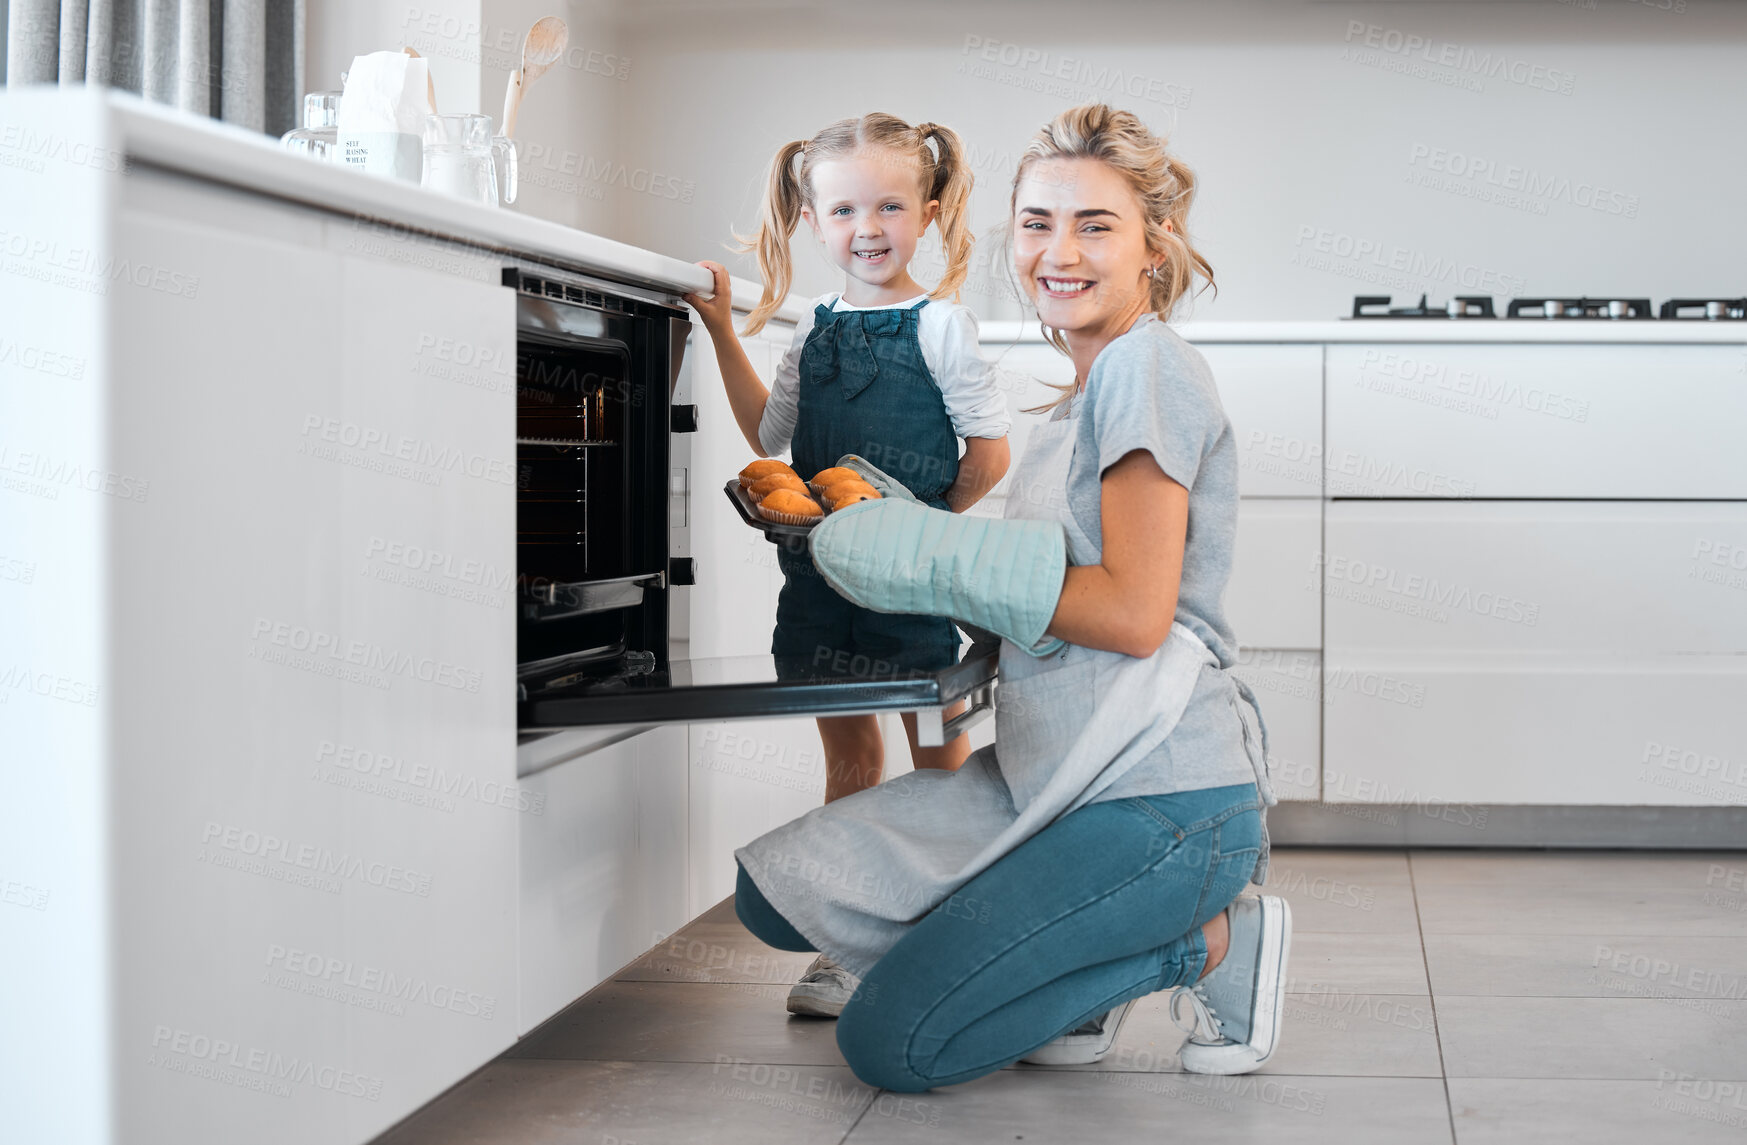 Buy stock photo Smiling mother and daughter baking together. Happy parent and child holding tray of baked muffins.Caucasian woman taking fresh, baked muffins out of the oven. Portrait of a mother and daughter baking